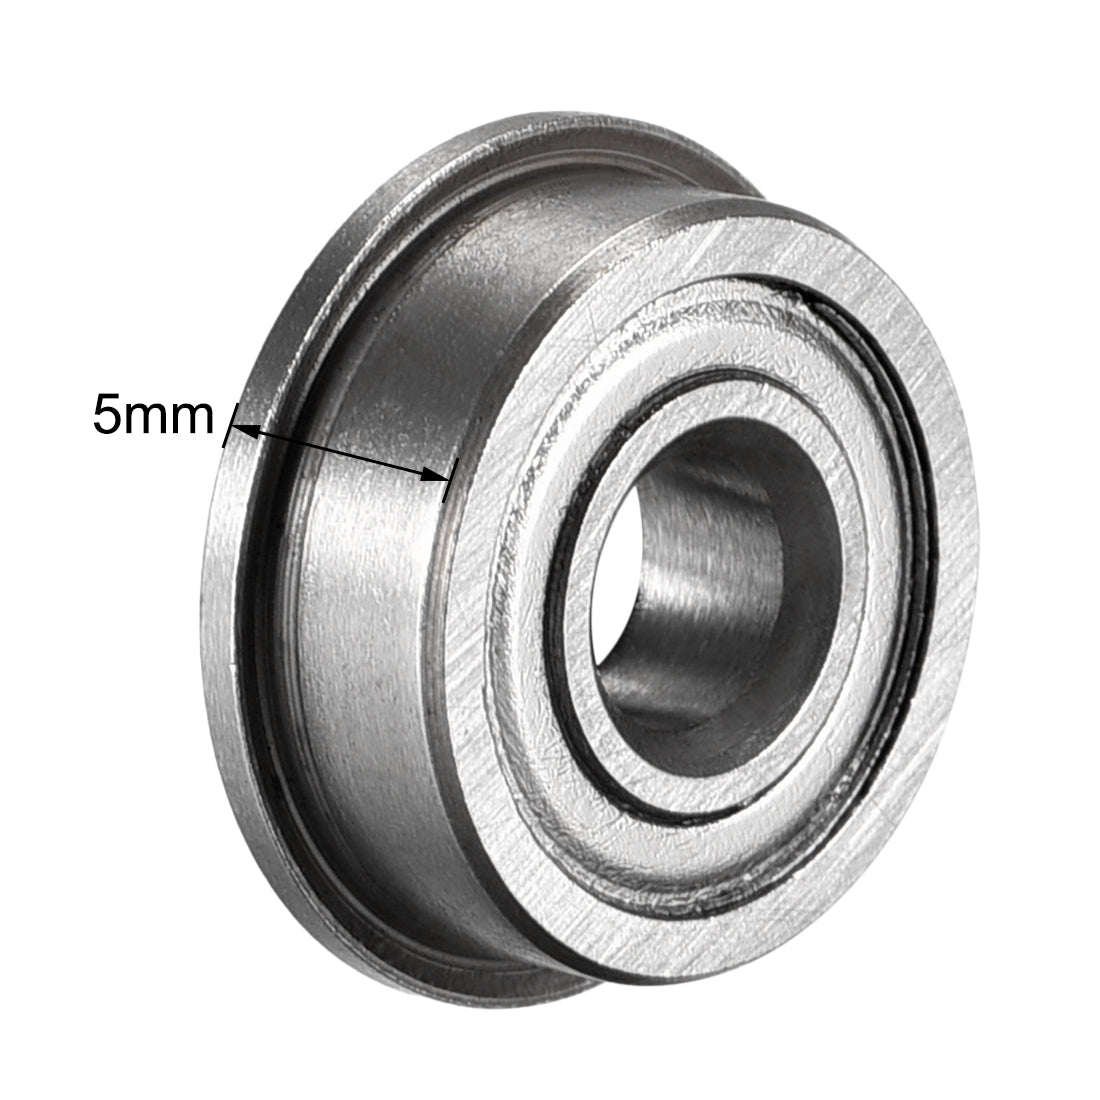 uxcell Uxcell Flange Ball Bearing Double Shielded Chrome Steel Bearing